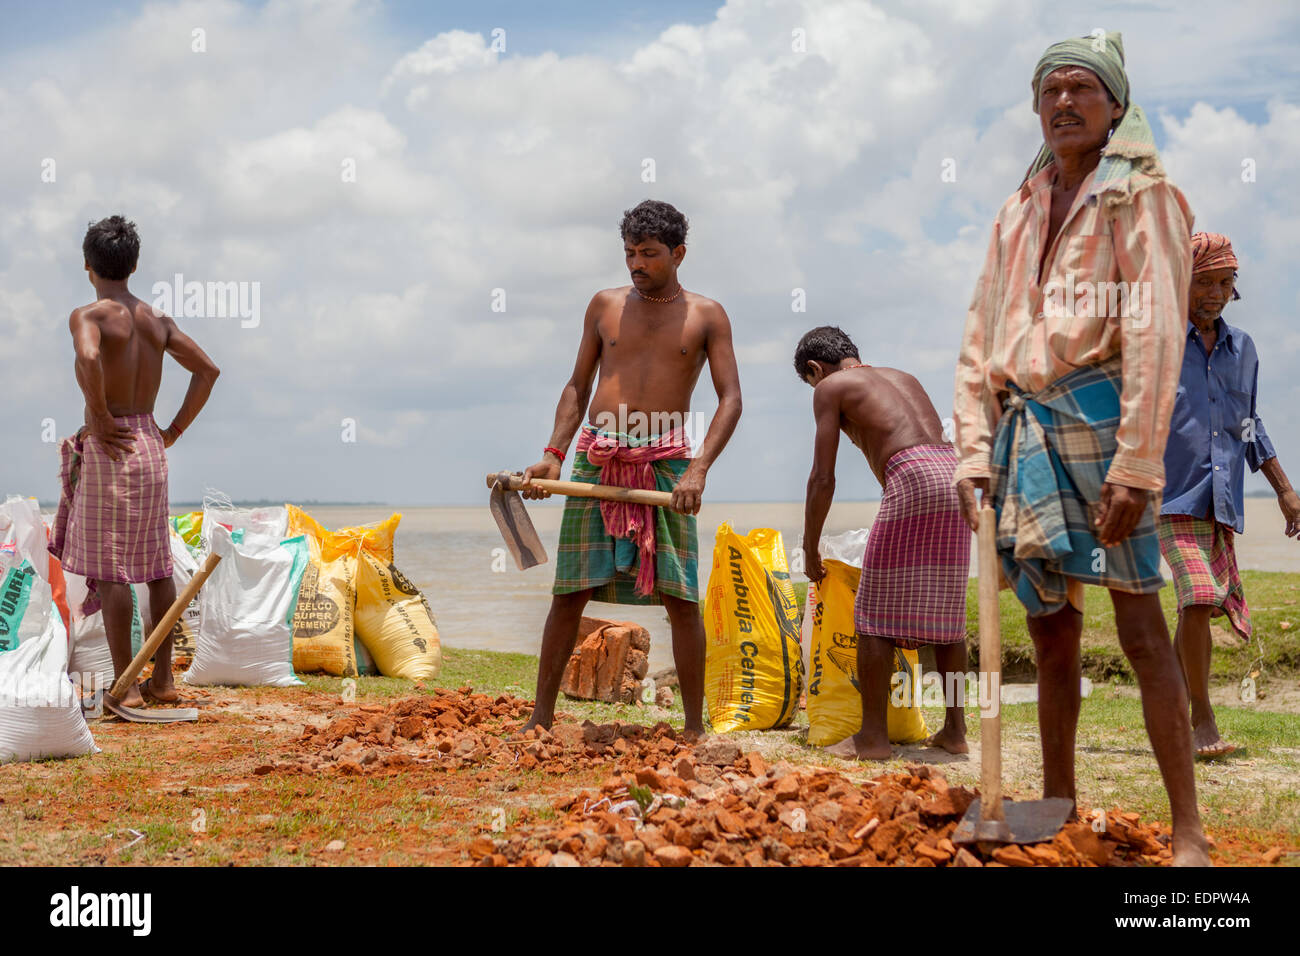 Workers filling sacks with pieces of brick for river erosion control project on the bank of Rupnarayan river in Tamluk, West Bengal, India. Stock Photo